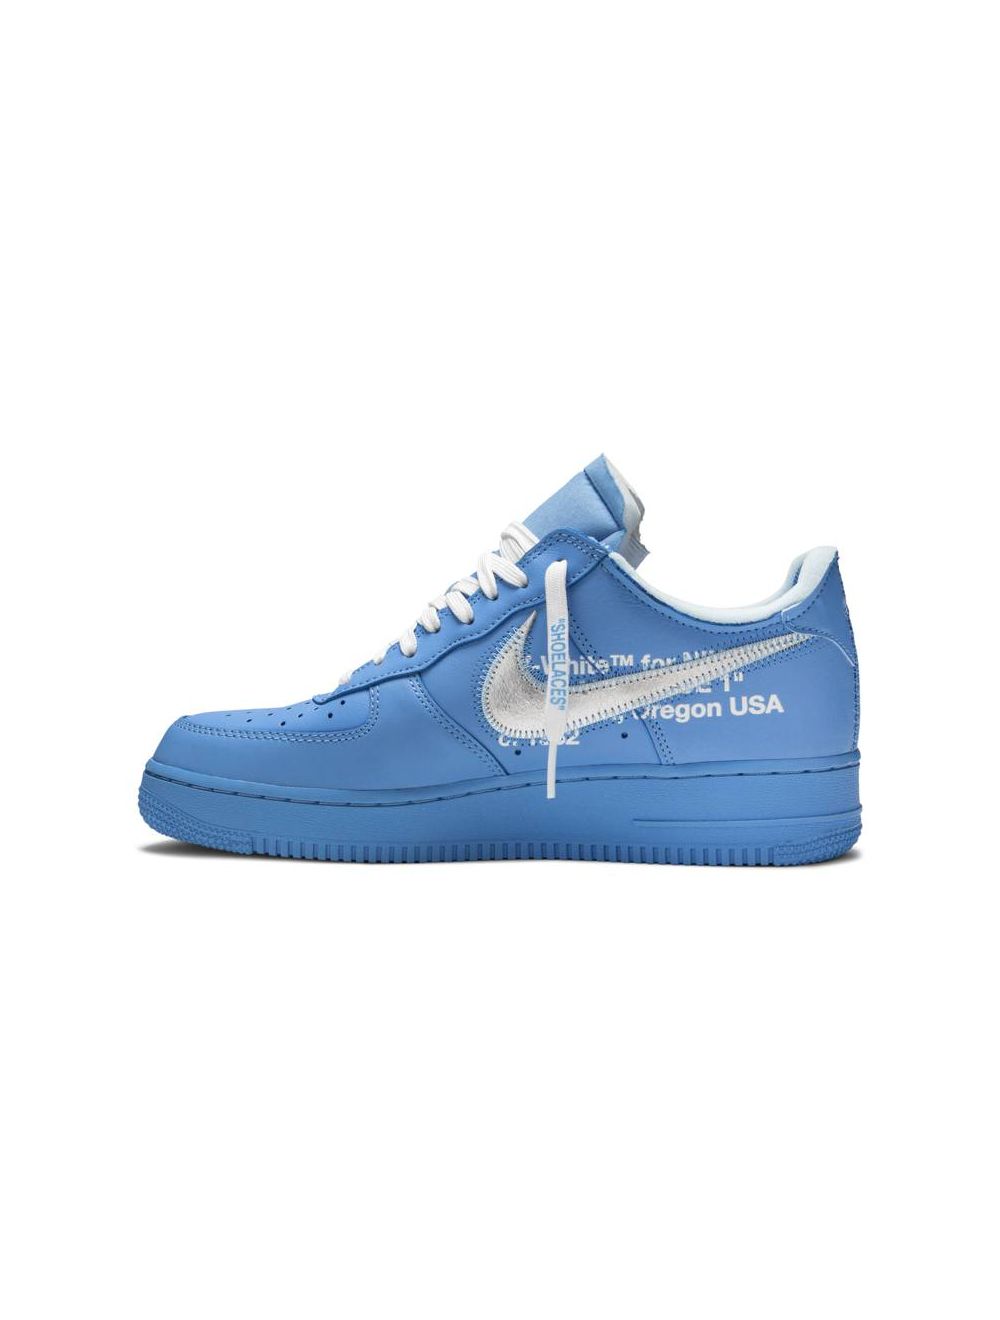 How To Tell Fake Off-White Air Force 1 MCA (2023)